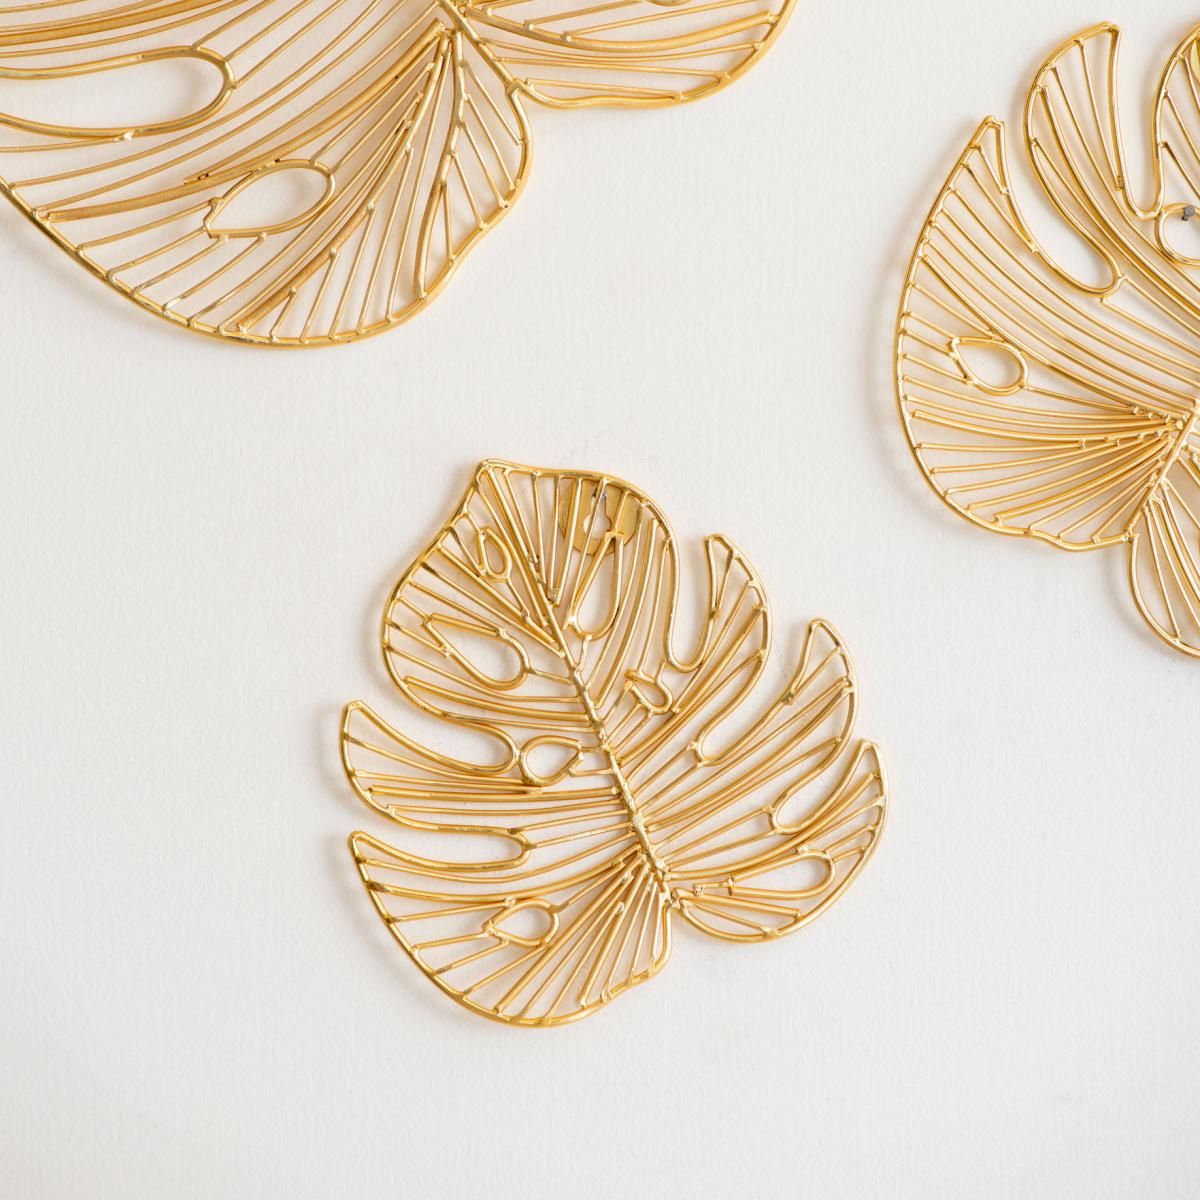 Palm Leaf Set Of 3 Wall Decor Gold – The Decor Remedy With Regard To Current Gold Leaves Wall Art (View 20 of 20)